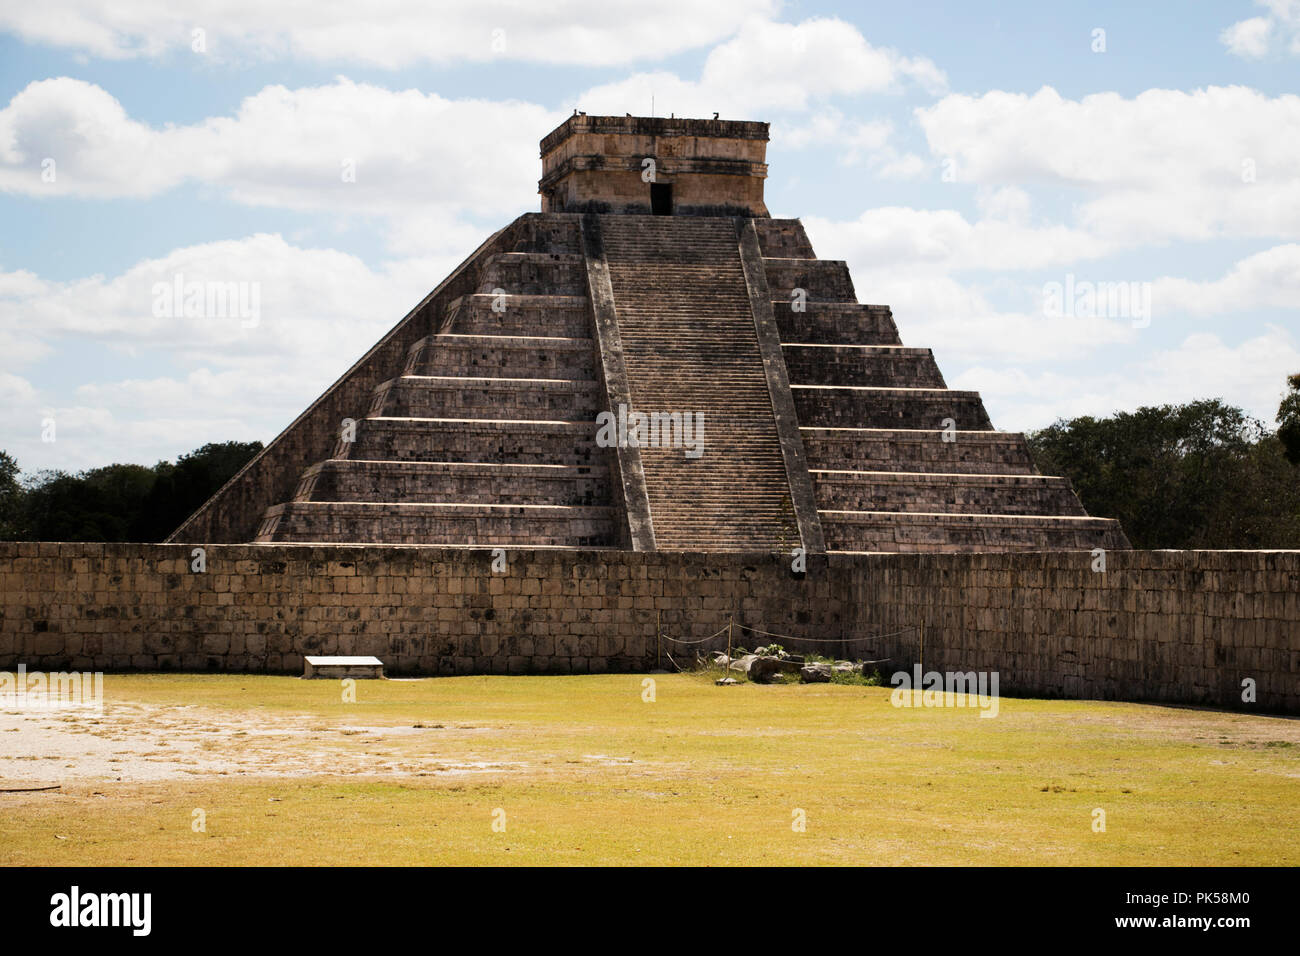 Historical Pyramid architecture of ancient civilization. Step Temple in Mexico. Stock Photo